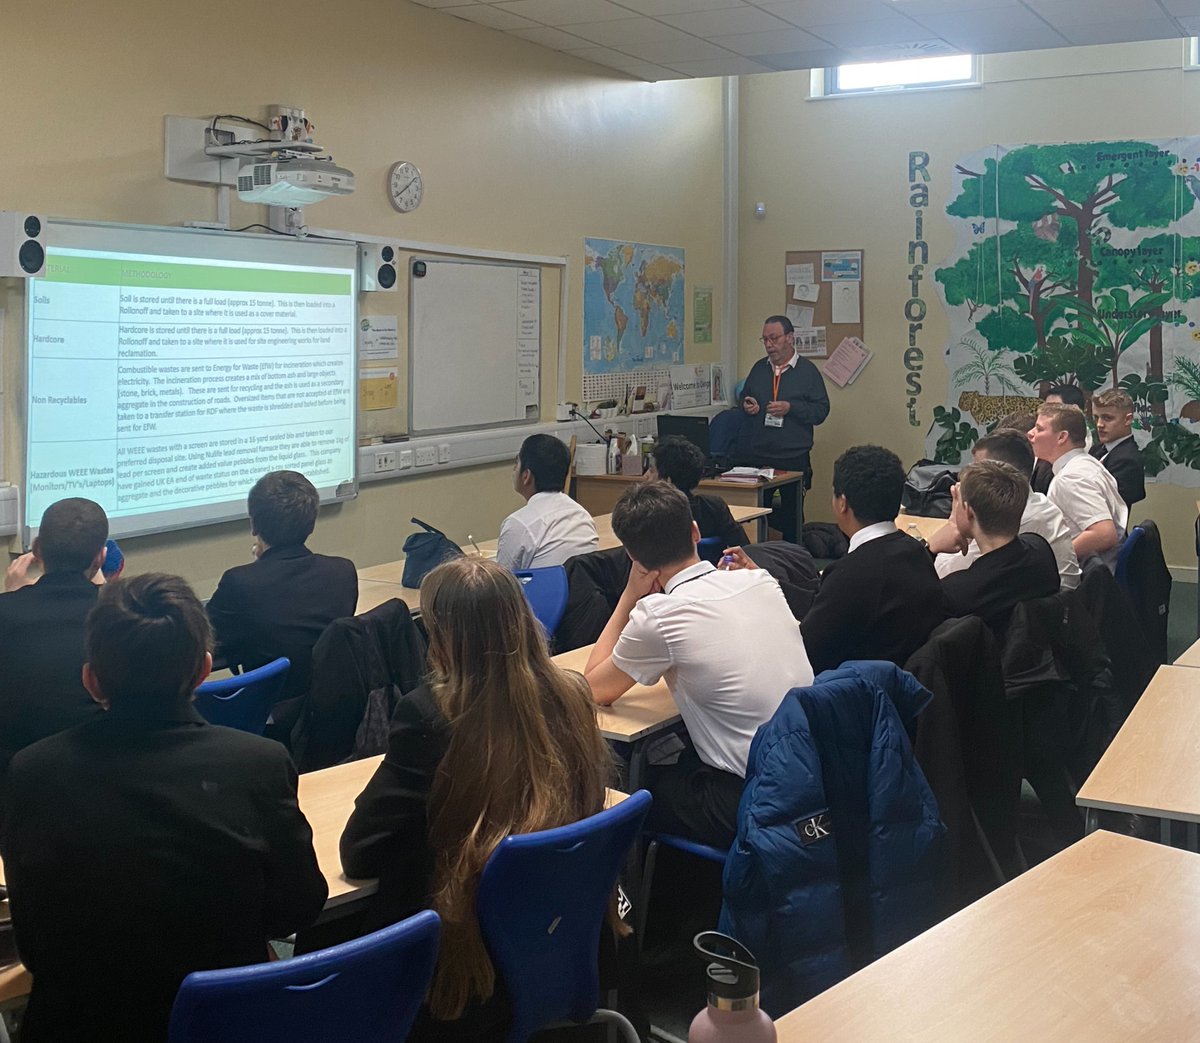 #DidYouKnow that April 22nd is #EarthDay and we are raising awareness this week for this by putting a focus on our #Environment Noel, guest speaker from #Ahern spoke to our students about his company deals with waste. #Eco #EcoCommittee #KingJohn #KingJohnSchool #KJS #Zenith